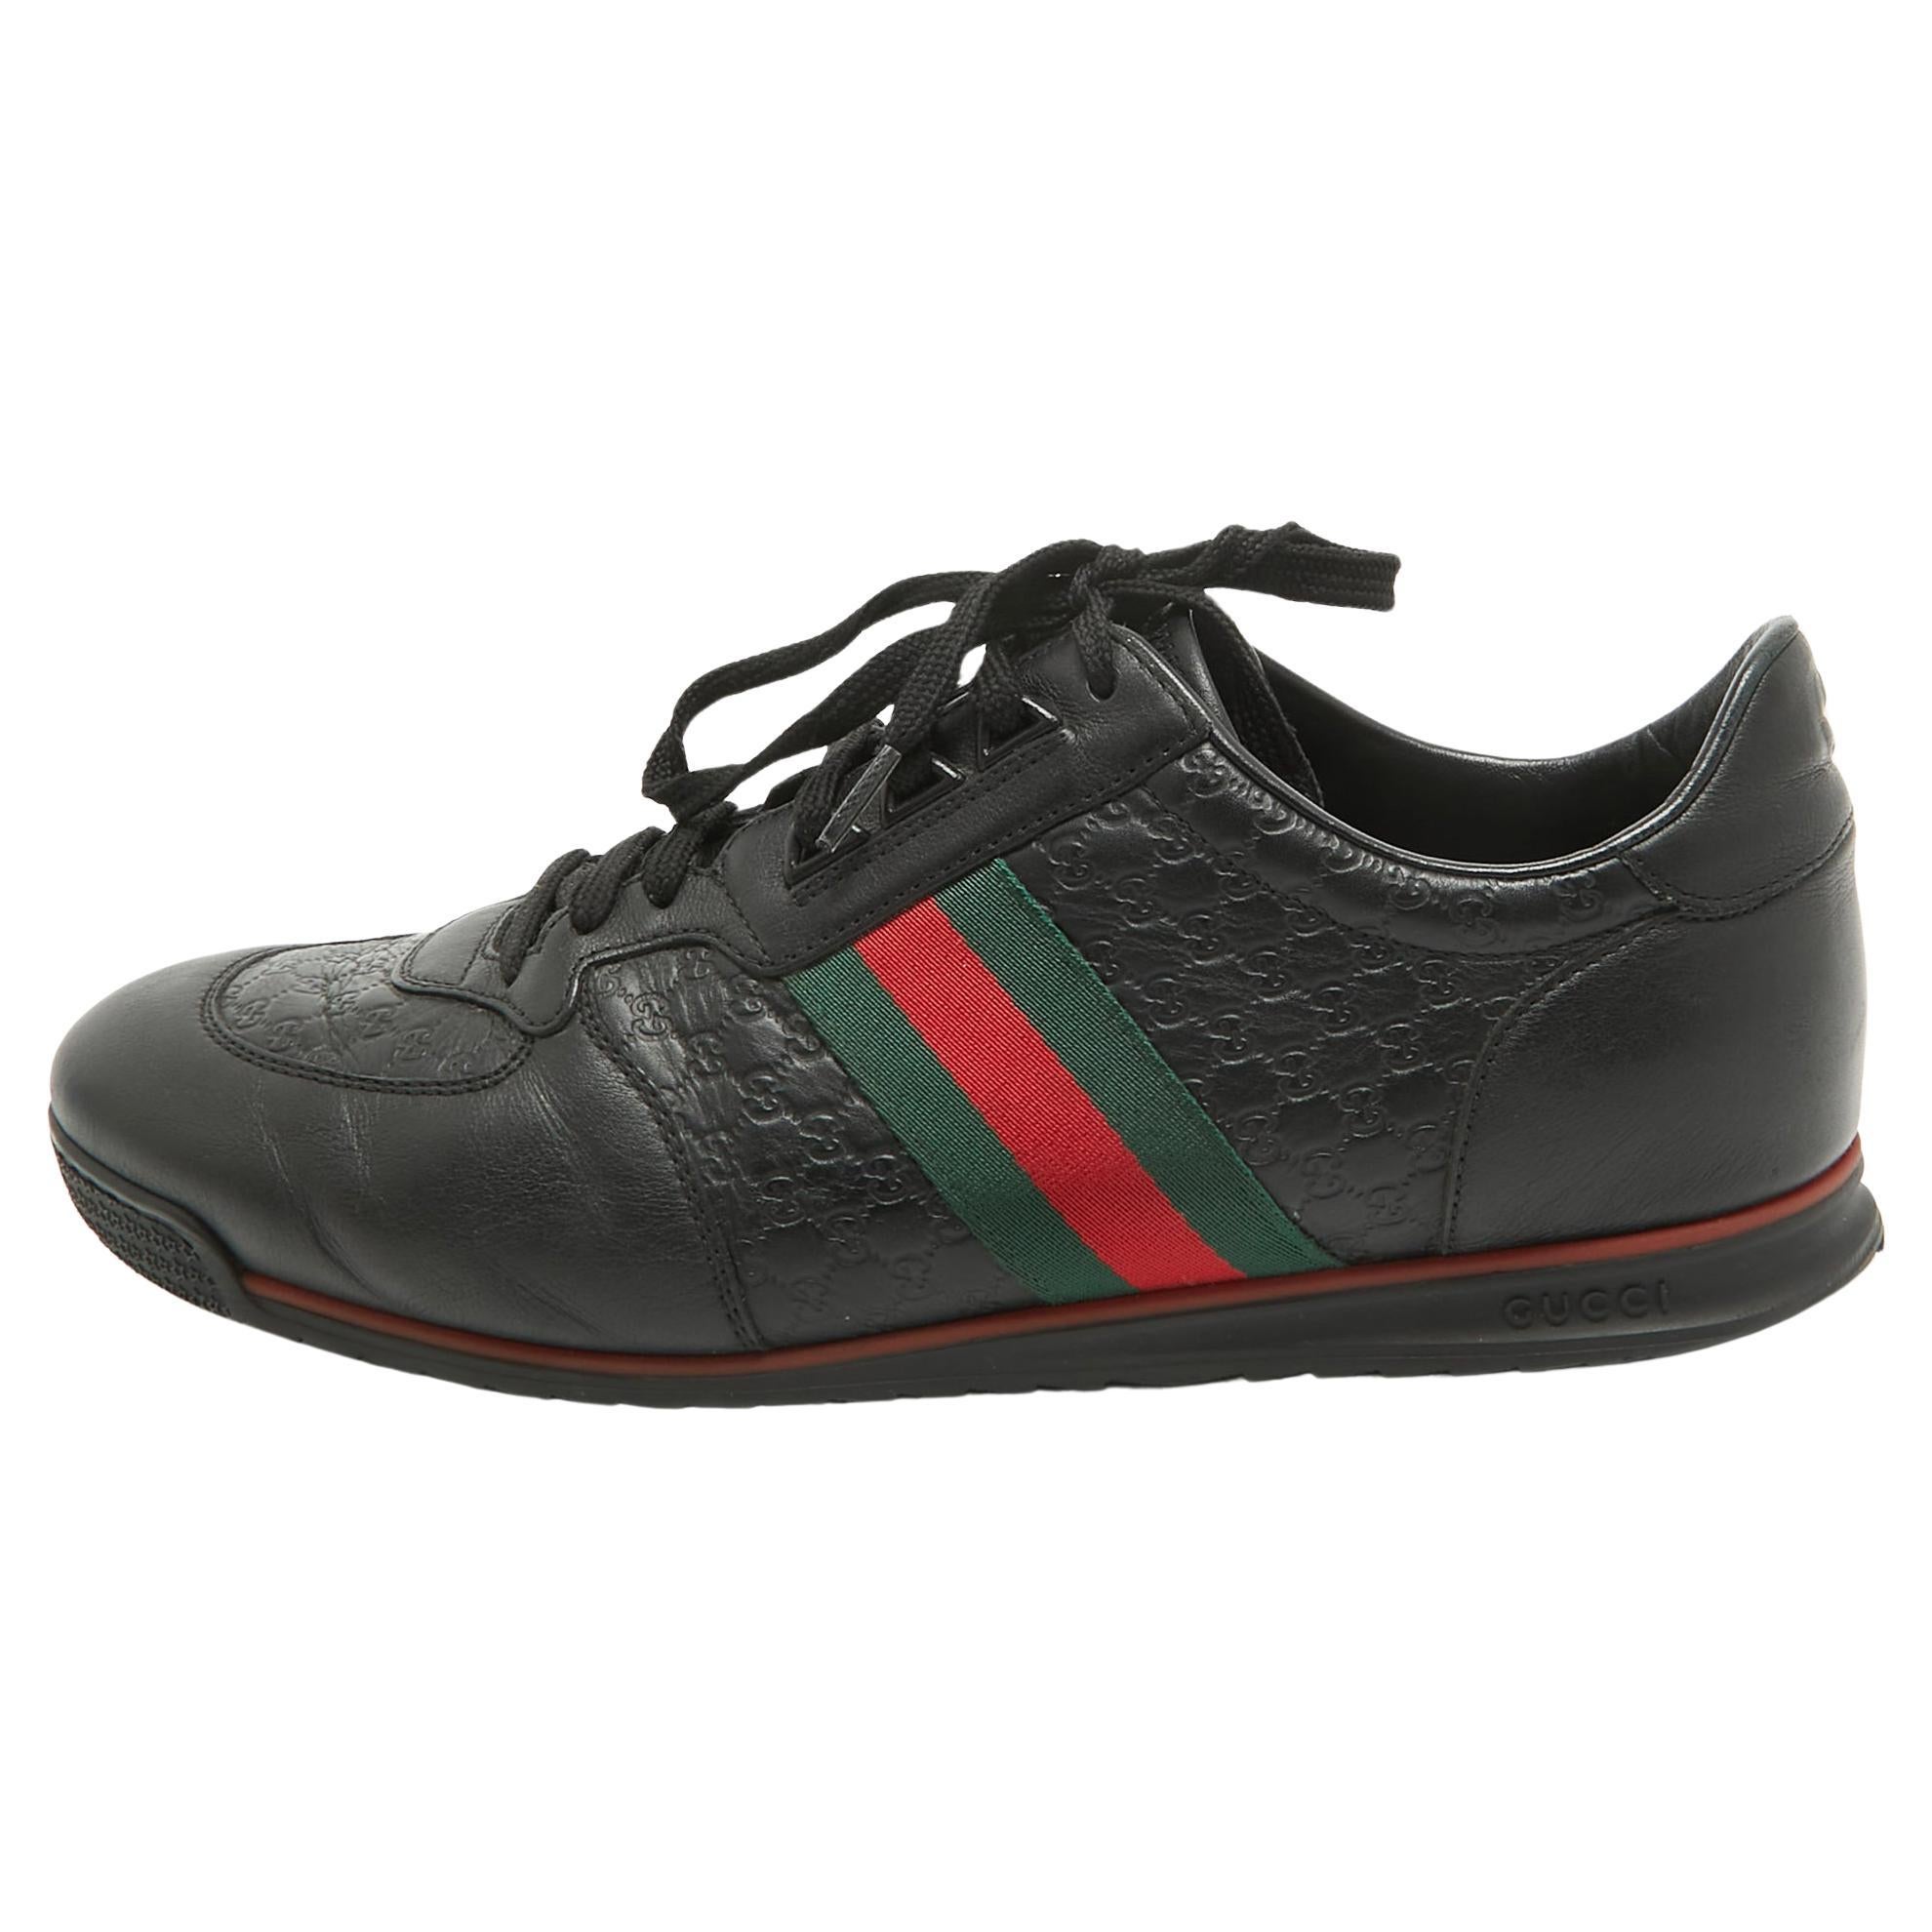 Gucci Black Guccissima Leather Web Ace Sneakers Size 45.5 For Sale